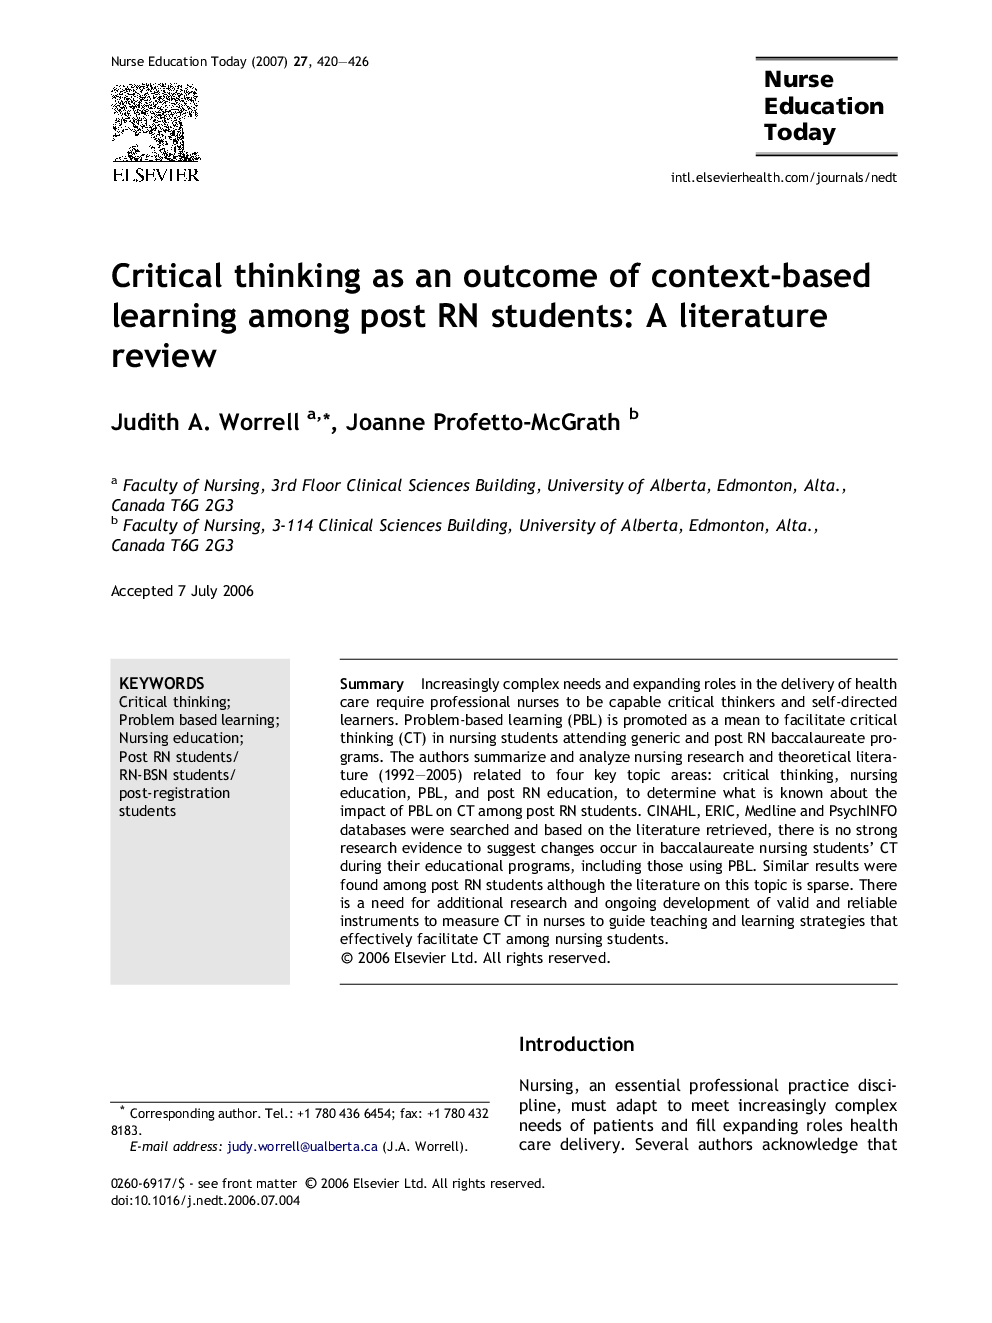 Critical thinking as an outcome of context-based learning among post RN students: A literature review